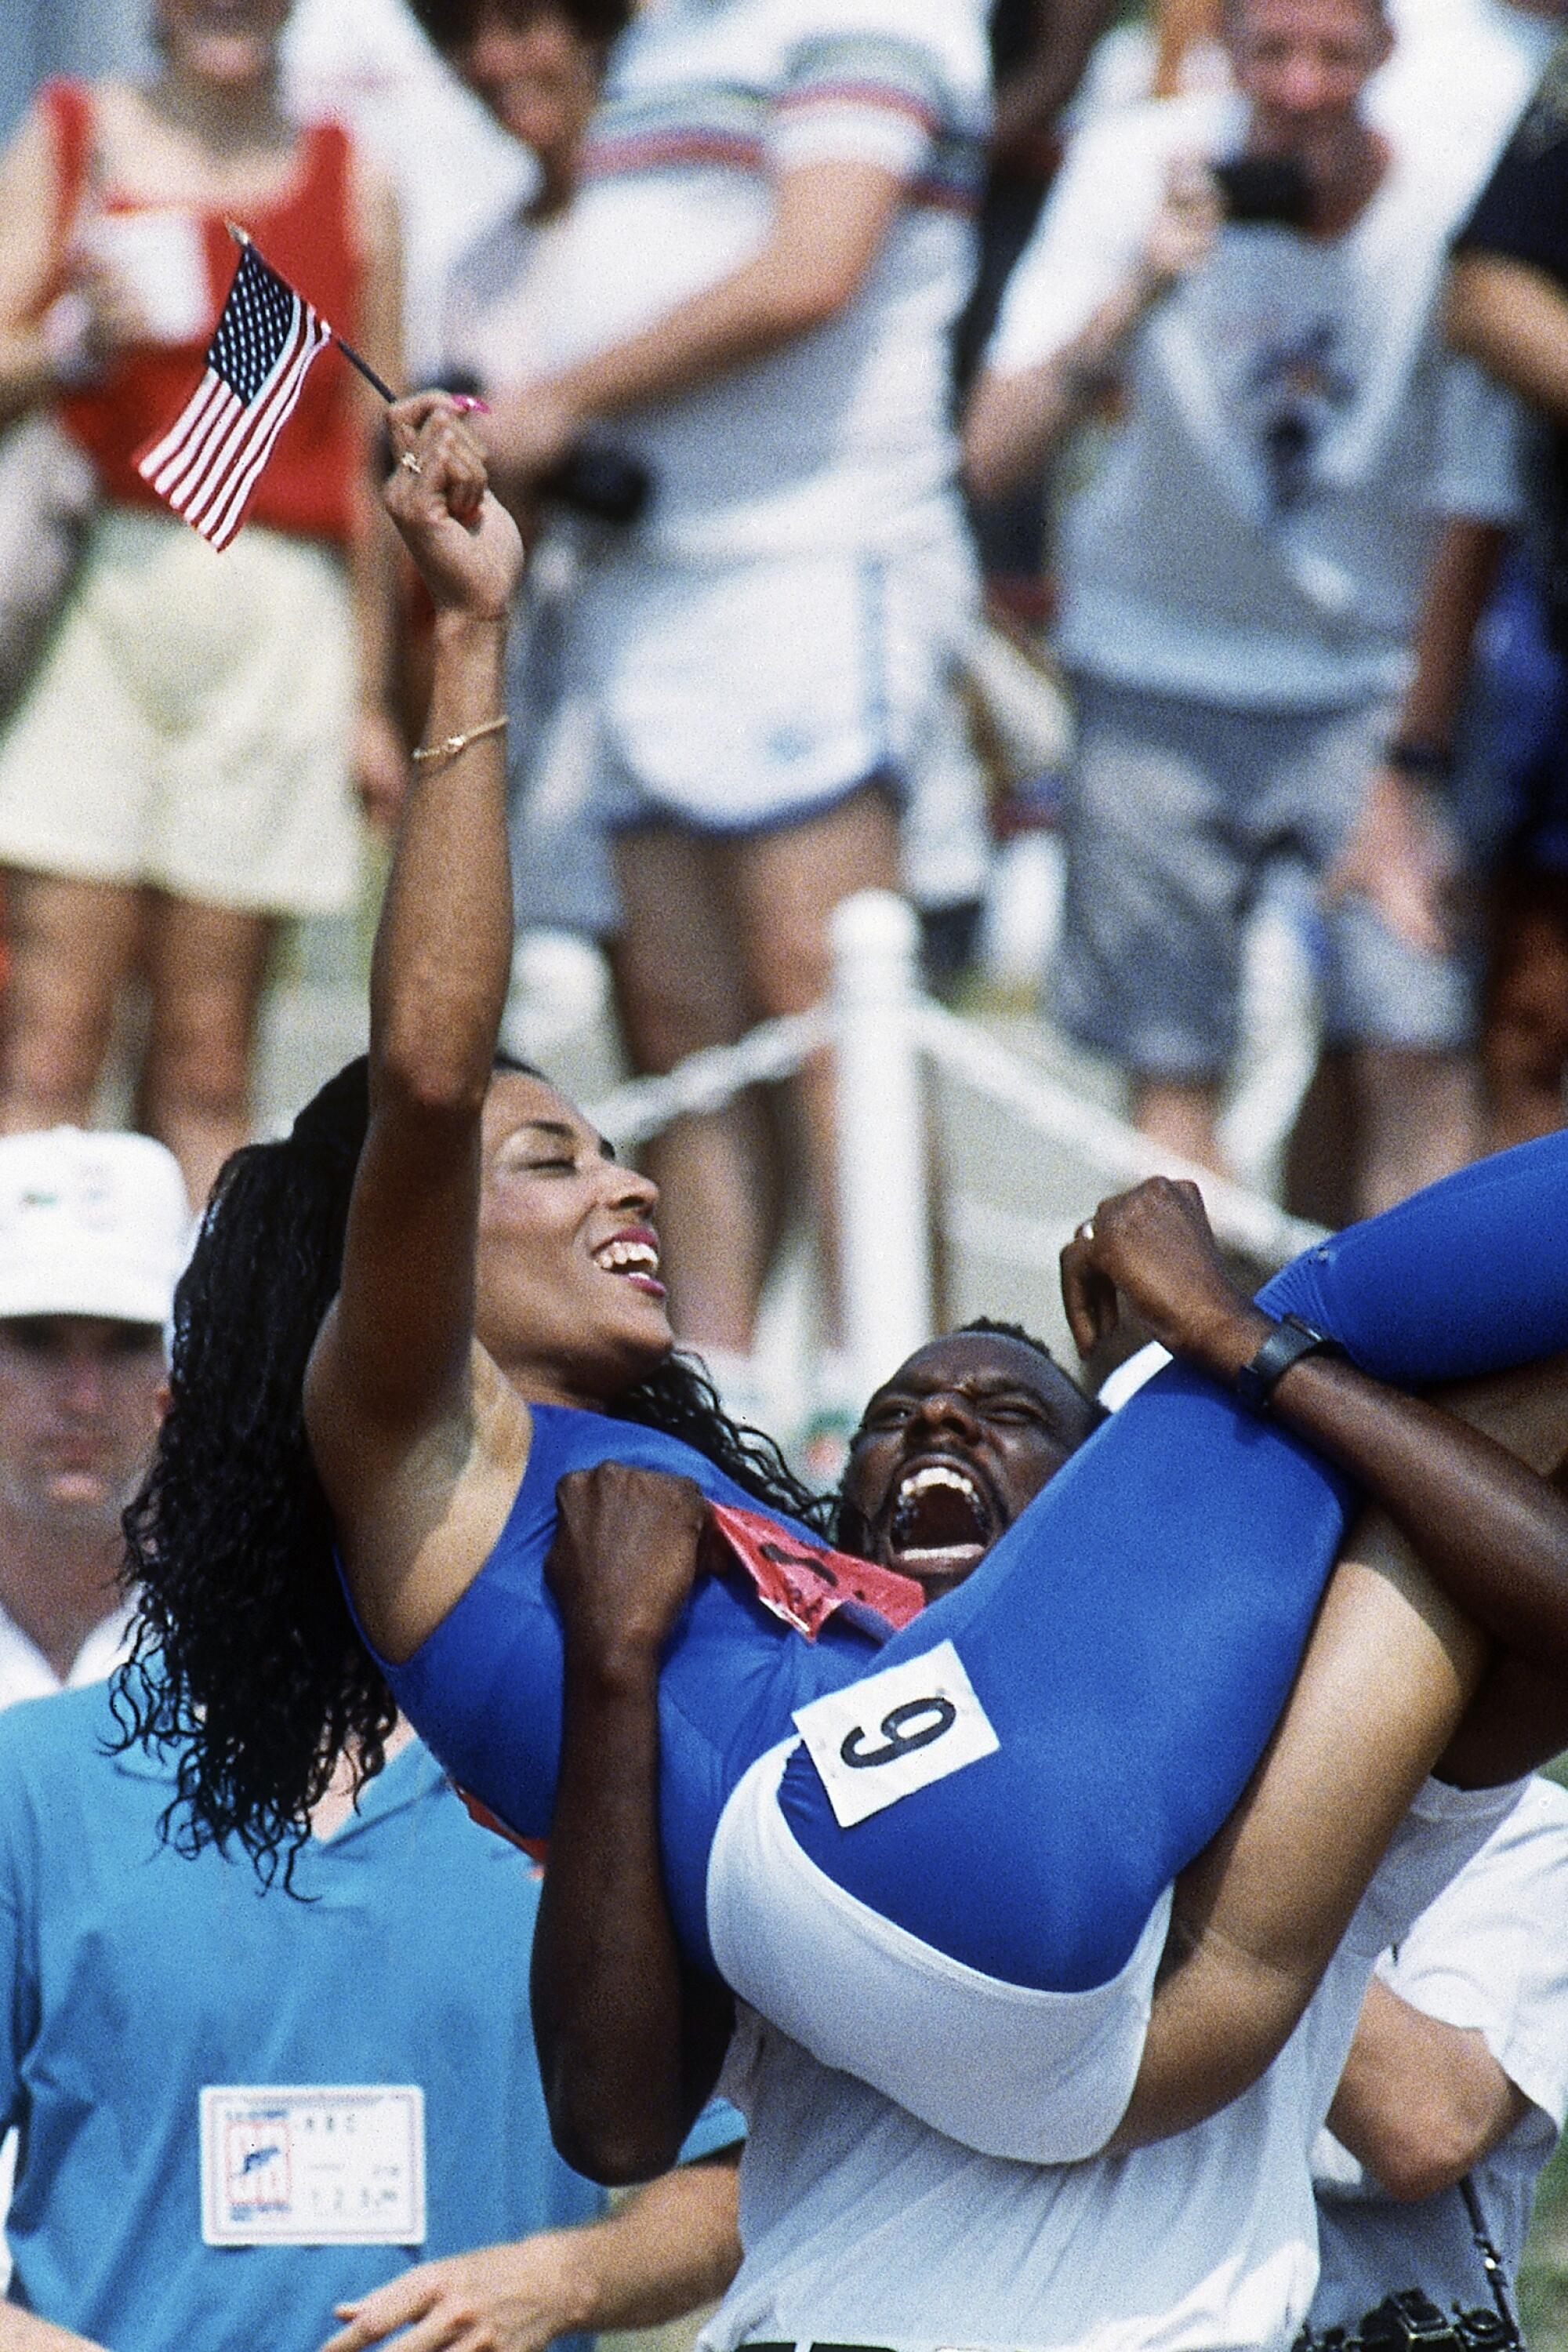 Bobby Kersee lifts Florence Griffith Joyner after her win in the women's 100 meters at the 1988 U.S. Olympic trials.